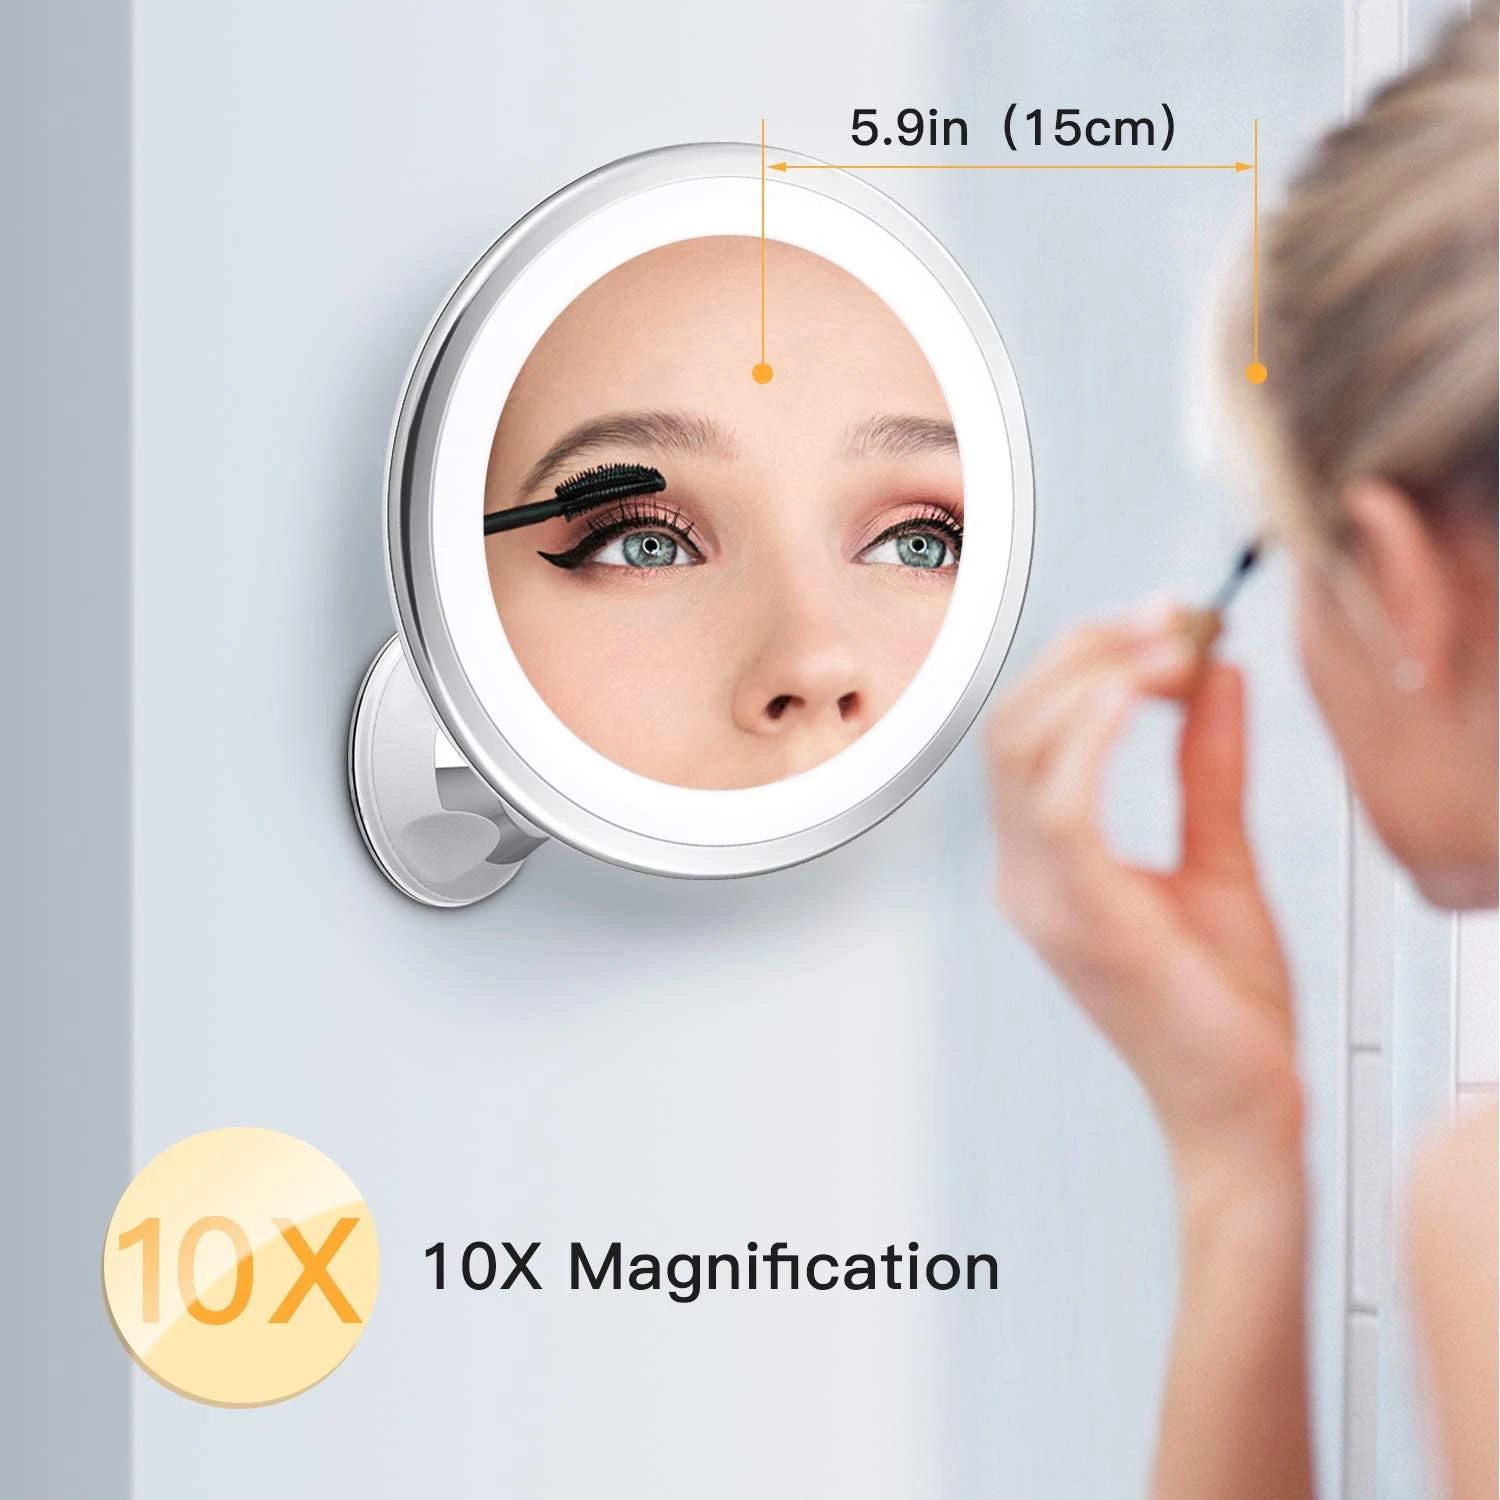 Bestope  3 Color Lighting Modes Intelligent Touch 360 degree Rotation Bathroom LED Suction Cup Mirror 10X  Light Mirror Makeup